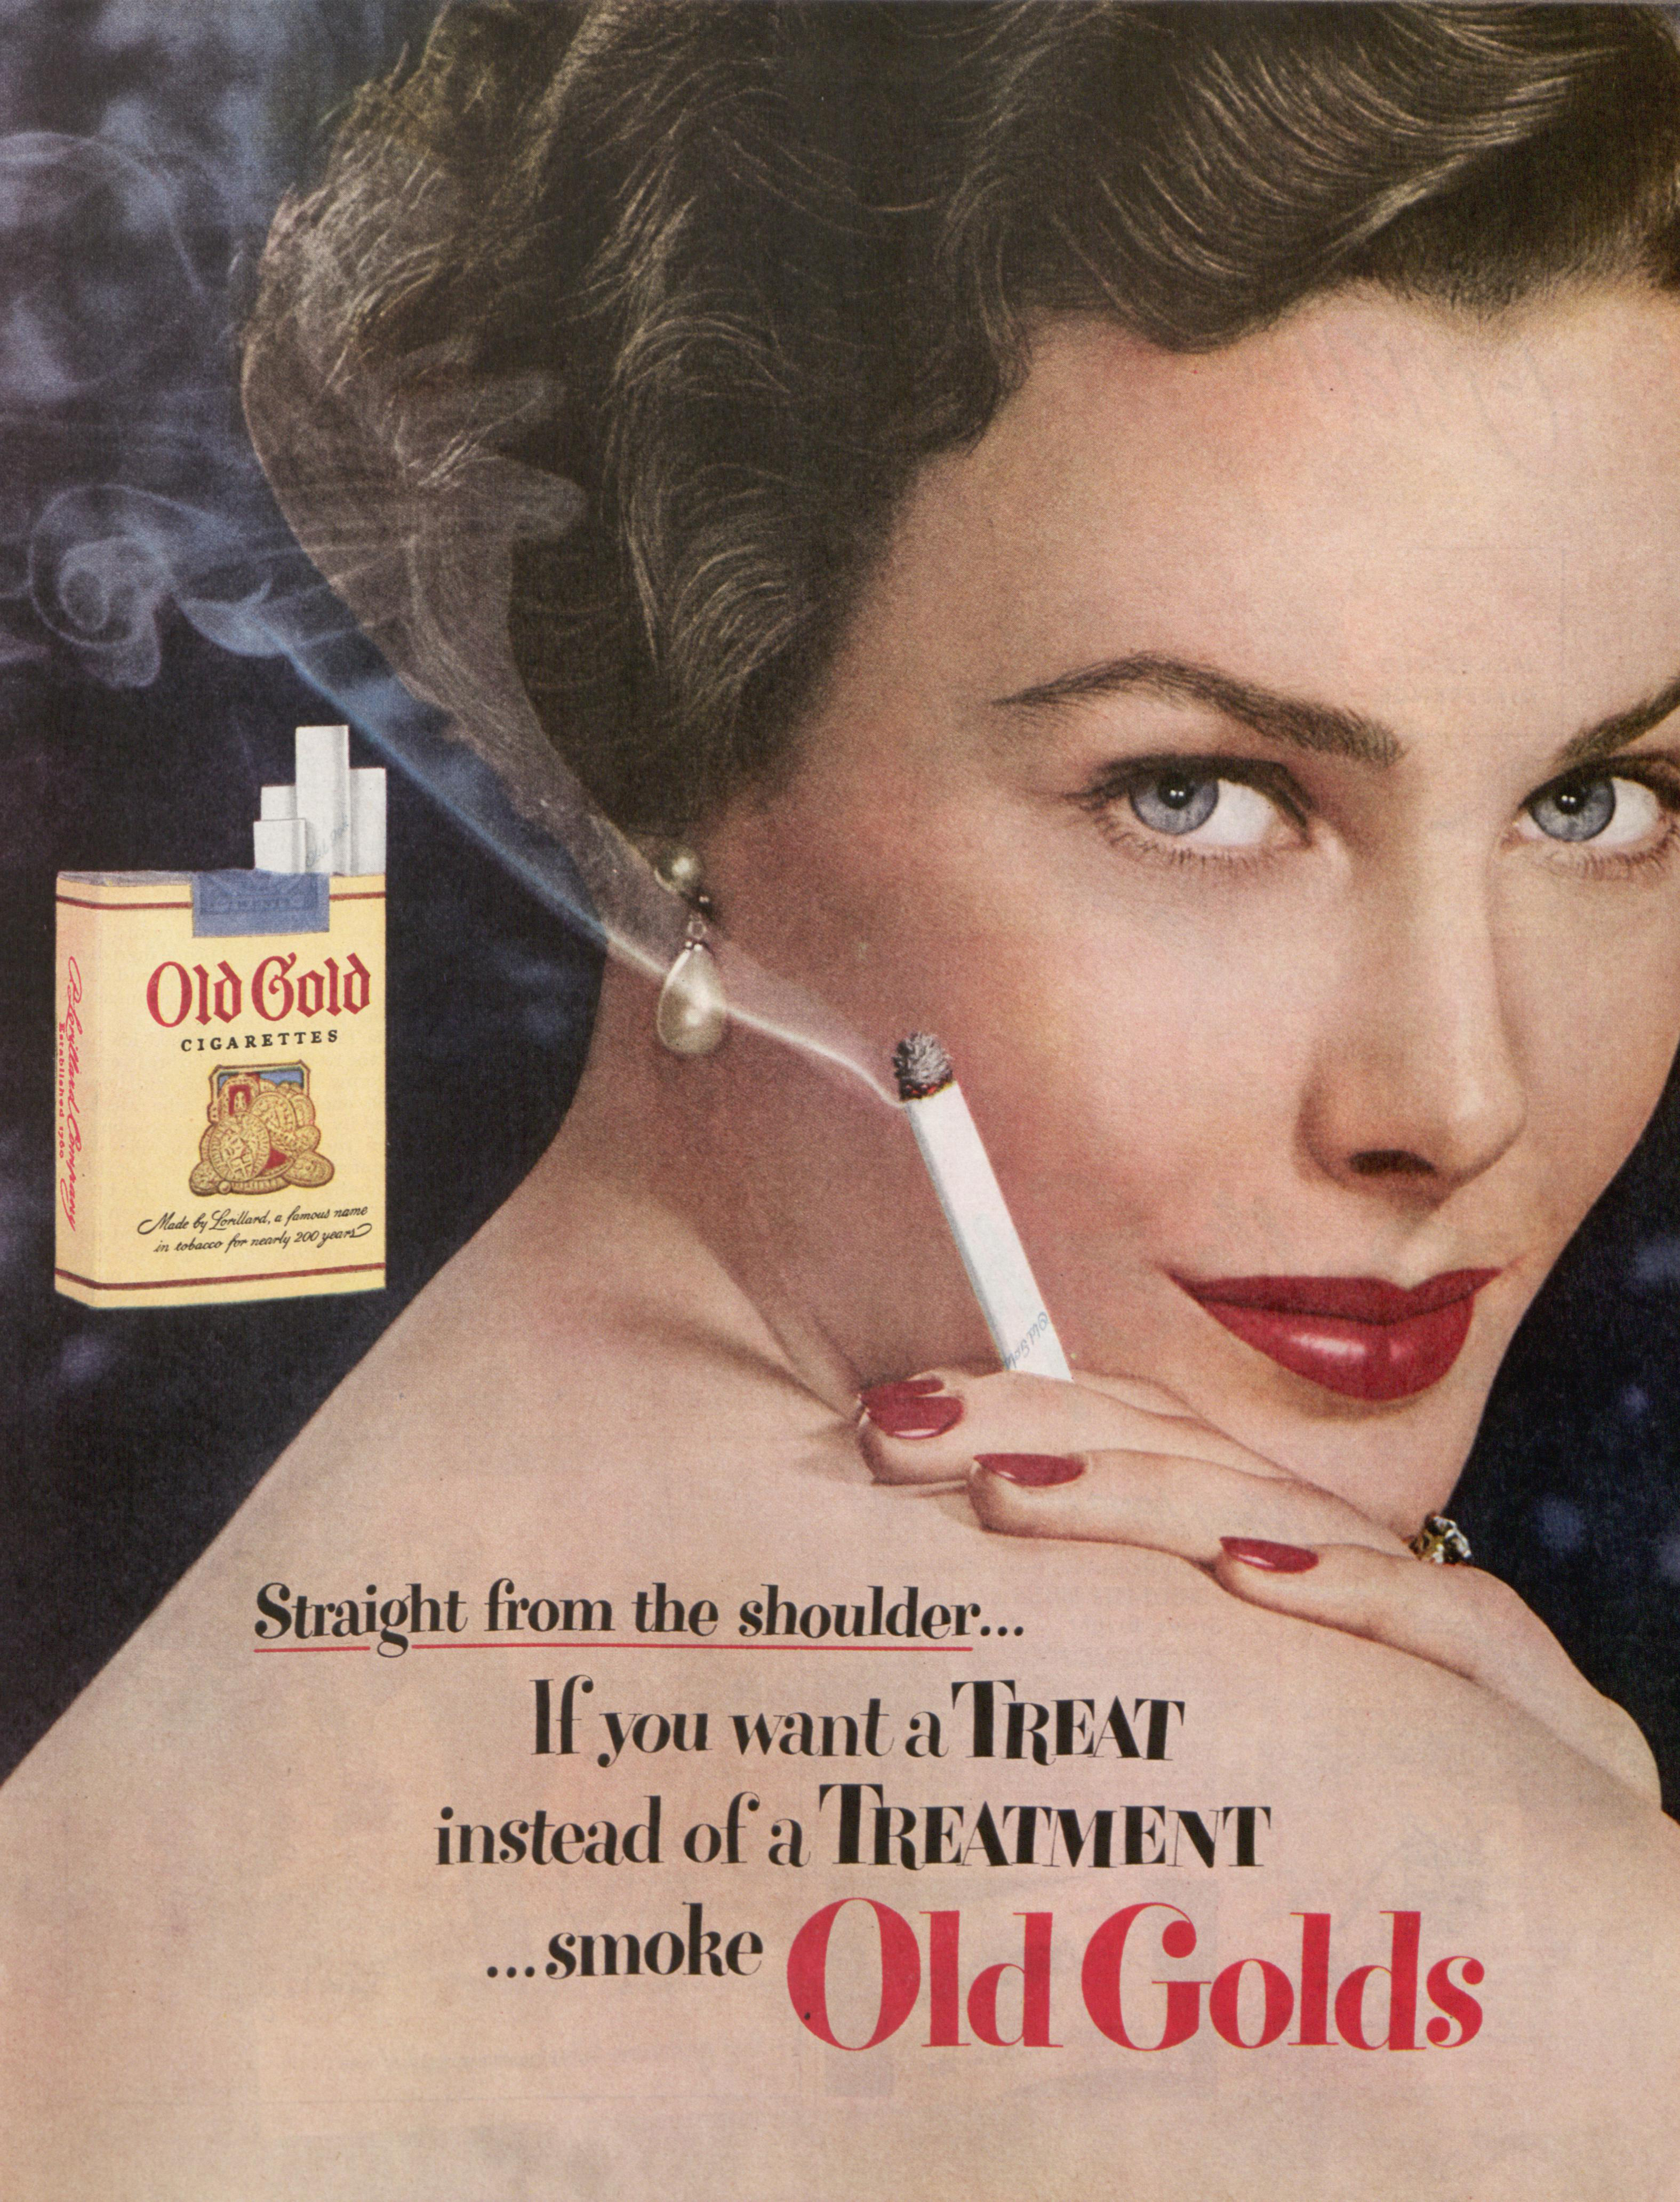 Vintage Ads Selling Cigarettes With Sex The Saturday Evening Post ...